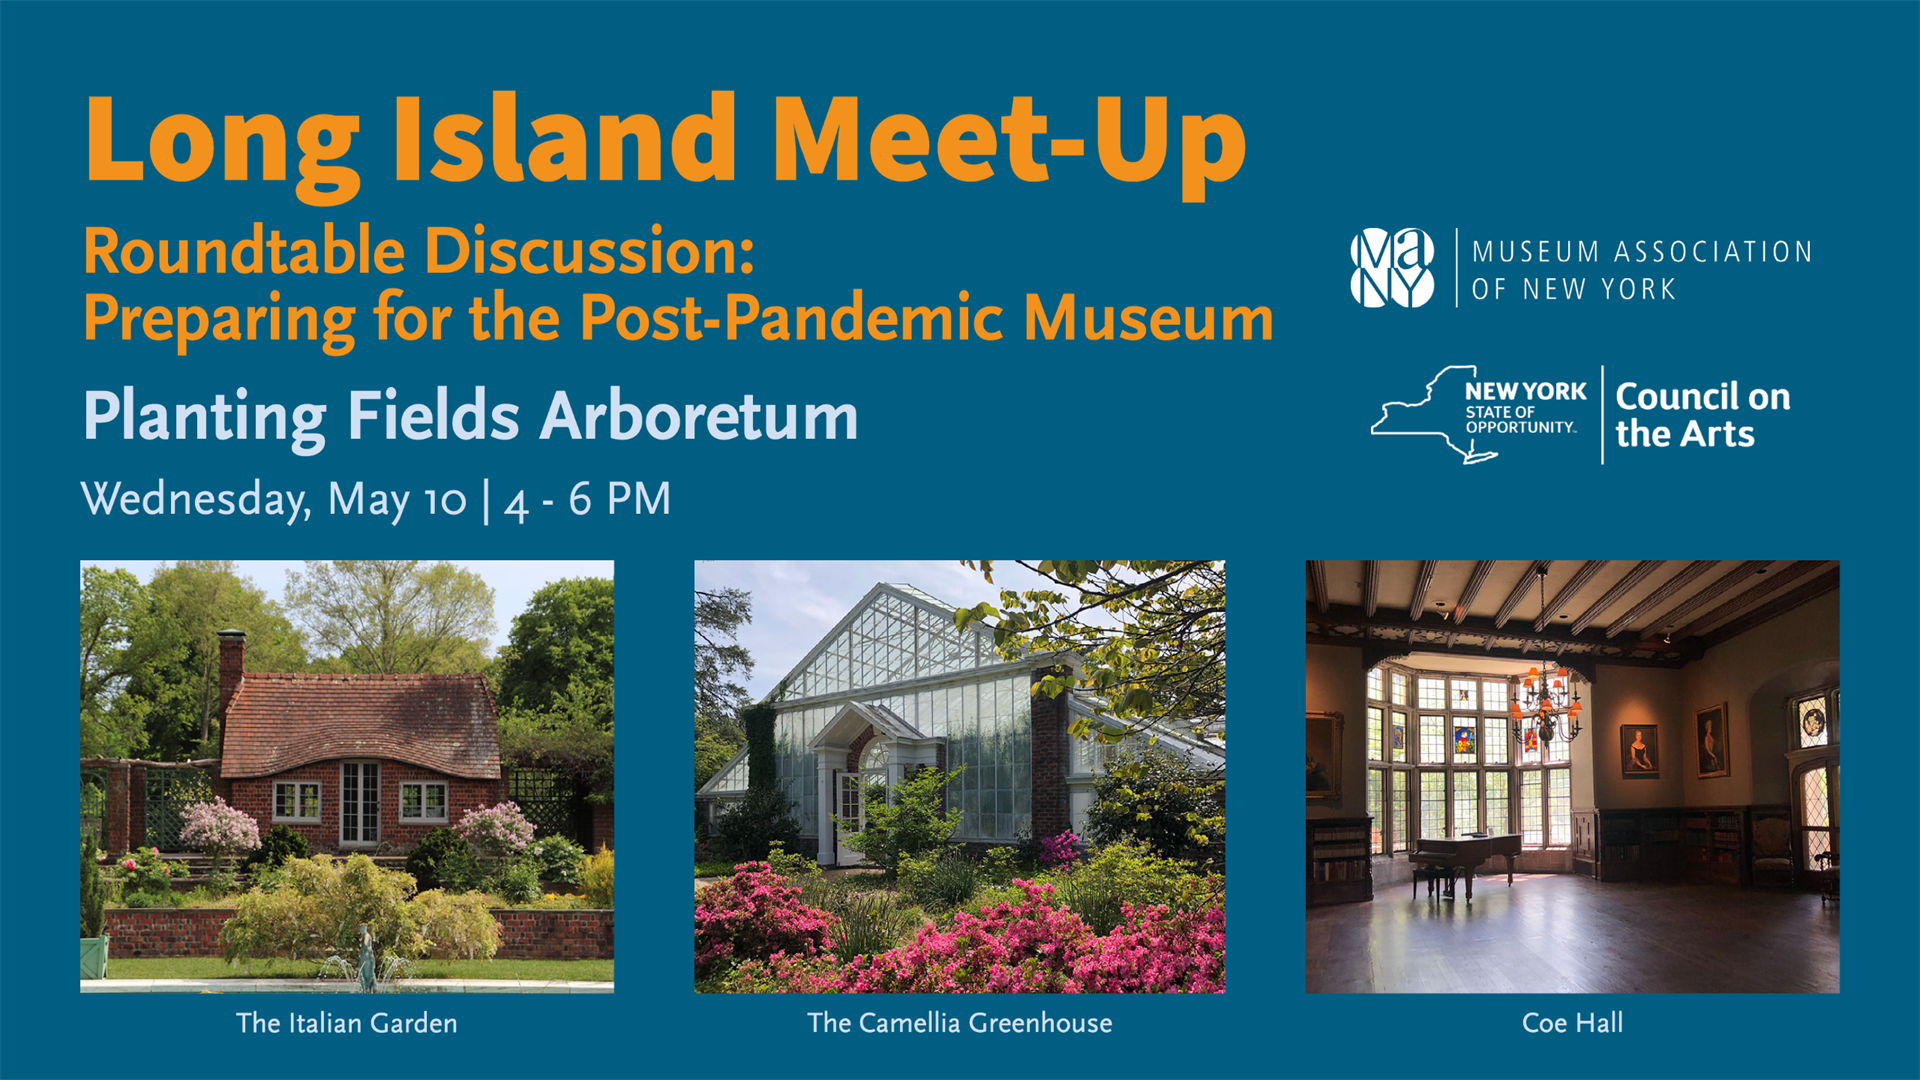 Long Island Meet-Up and Roundtable Discussion at Planting Fields Arboretum on May 10 from 4 to 6 PM